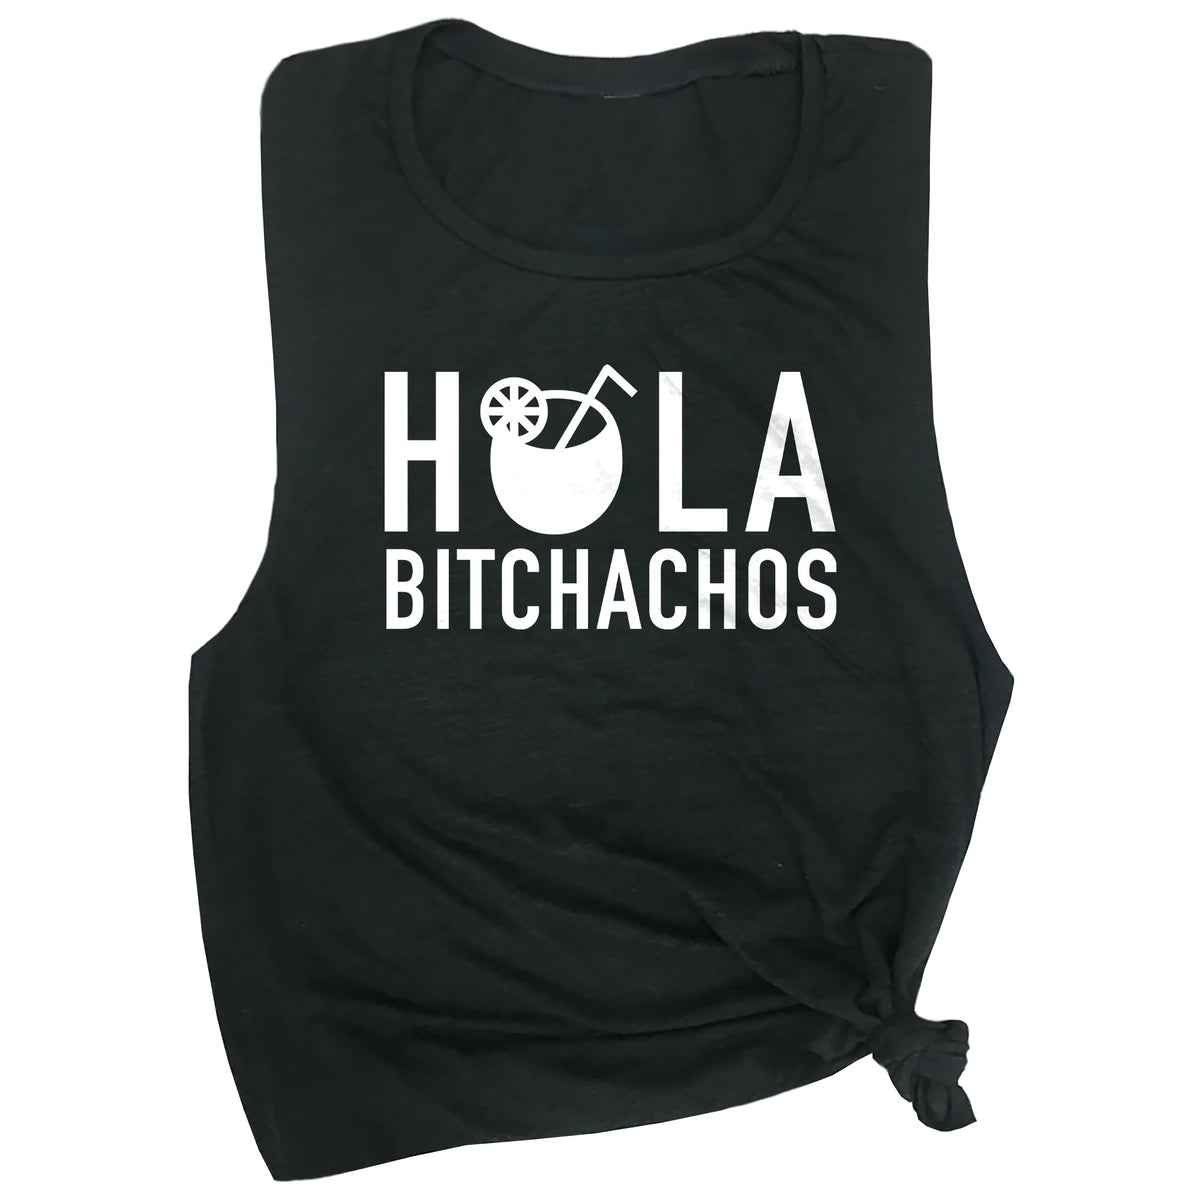 Hola Bitchachos Muscle Tee